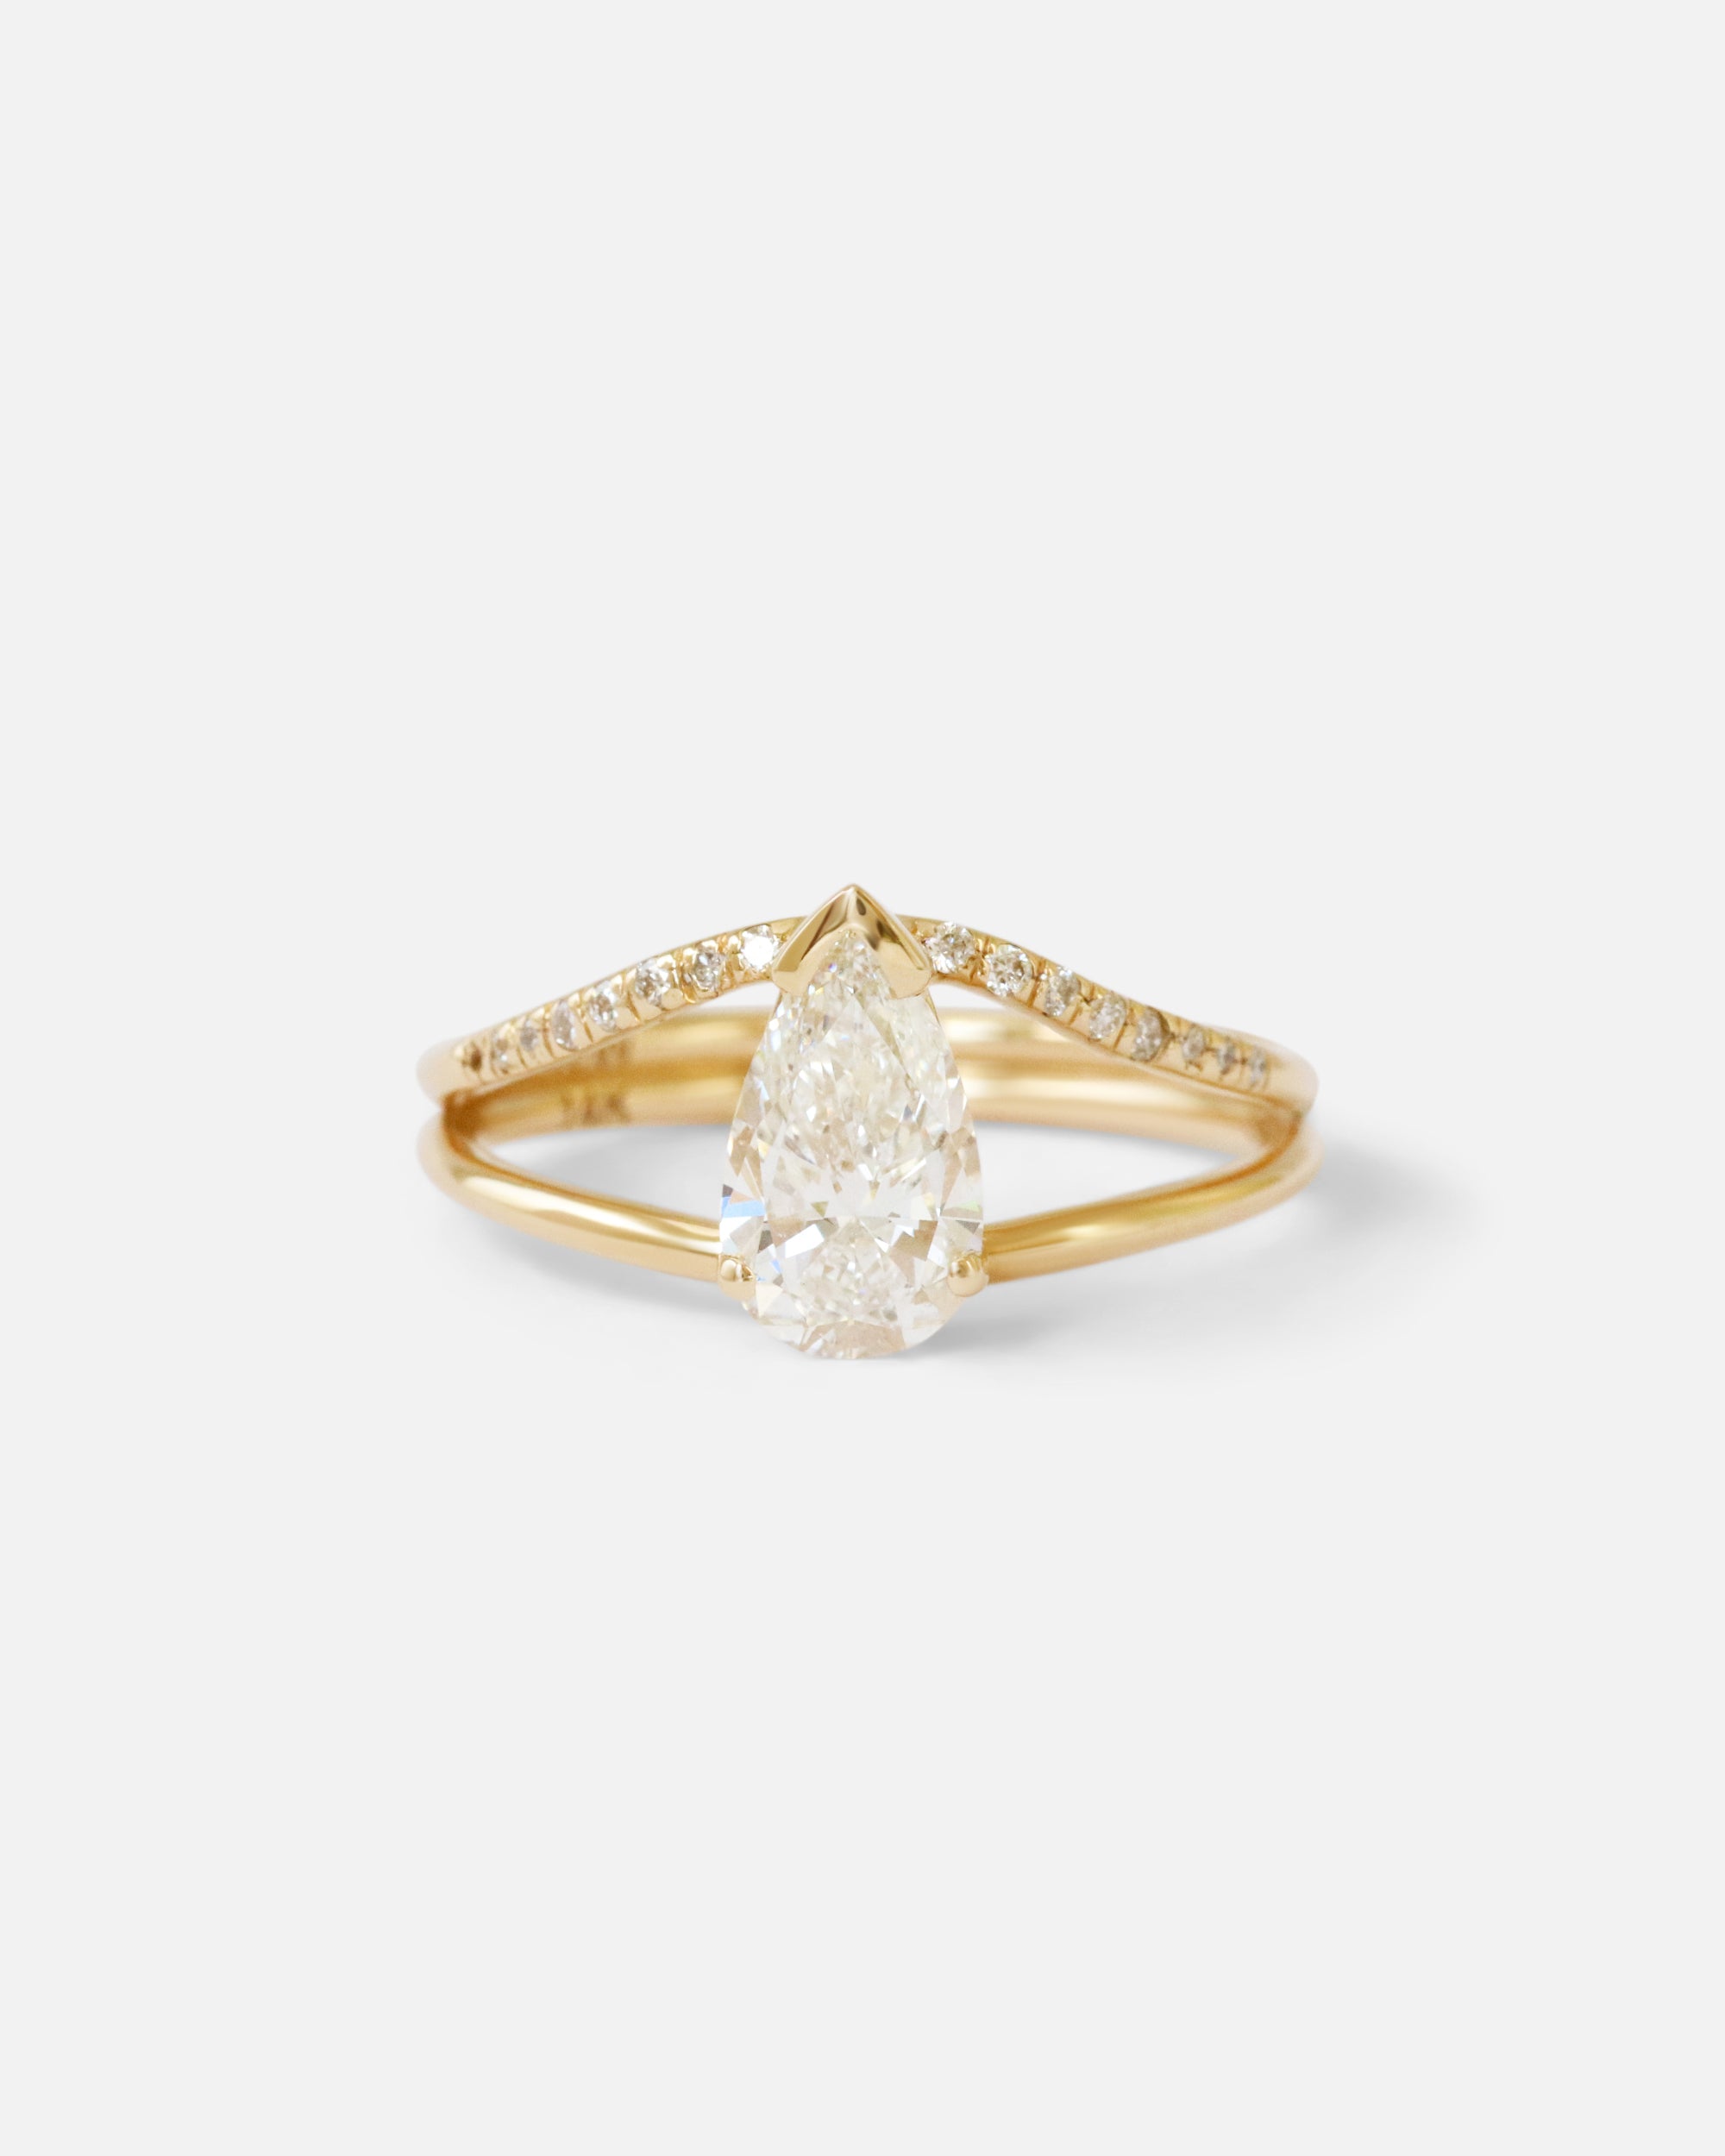 Rhea / Pear By Ruowei in Engagement Rings Category